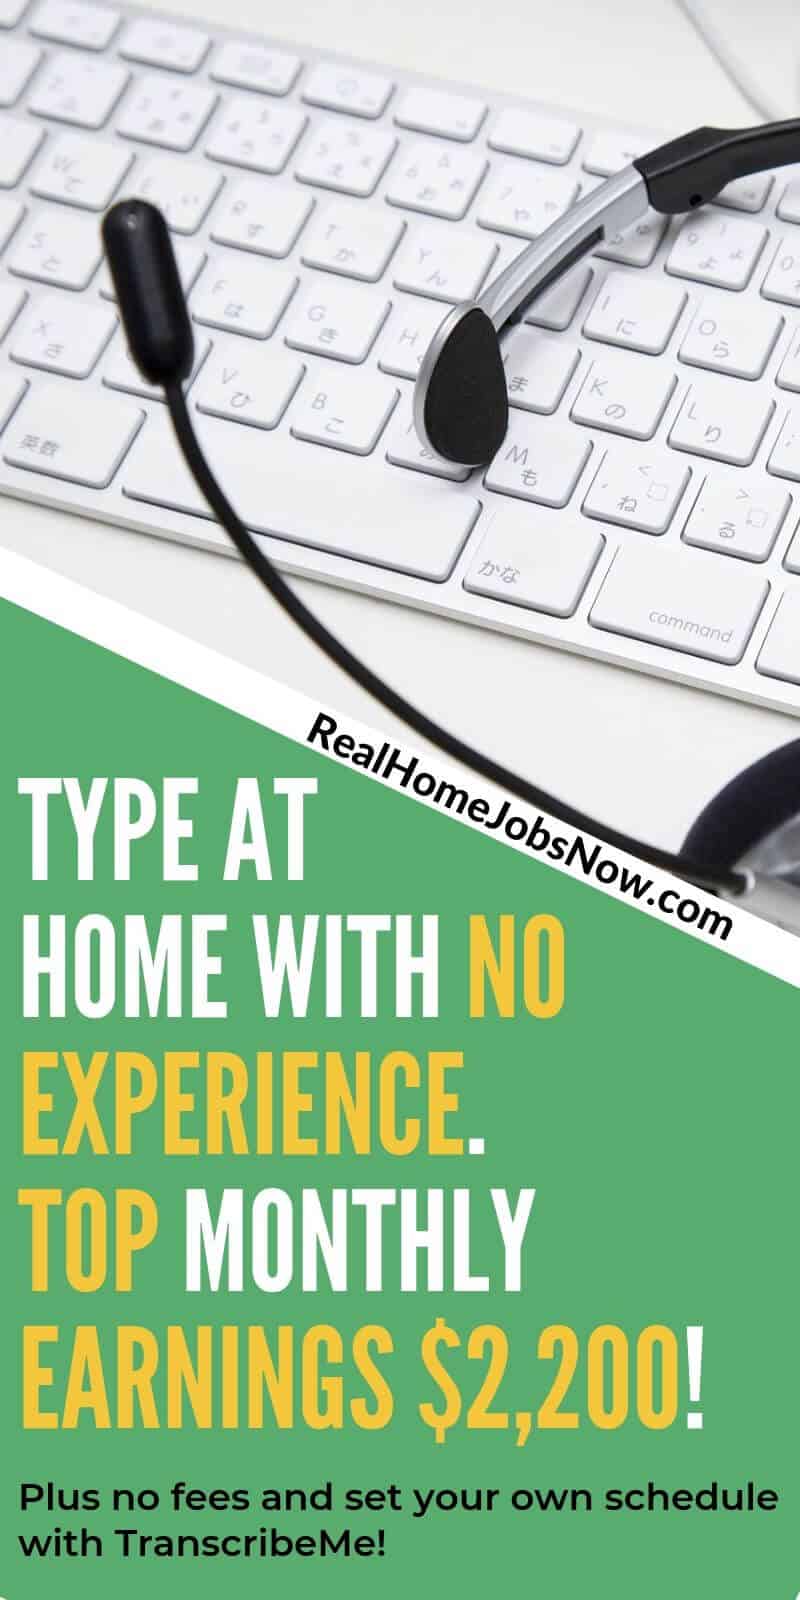 Type at home on your own schedule with TranscribeMe. No fees, no equipment, and no experience required. Top earners are bringing in over $2,000 per month. Get started today! #workfromhomejobs #nonphone #makemoneyonlinefree #earnmoneyfromhome #onlinejobsfromhome #makemoneyideas #earnextracash #makecashquick #easyonlinejobs #parttimejobsfromhome #workfromhomejobs